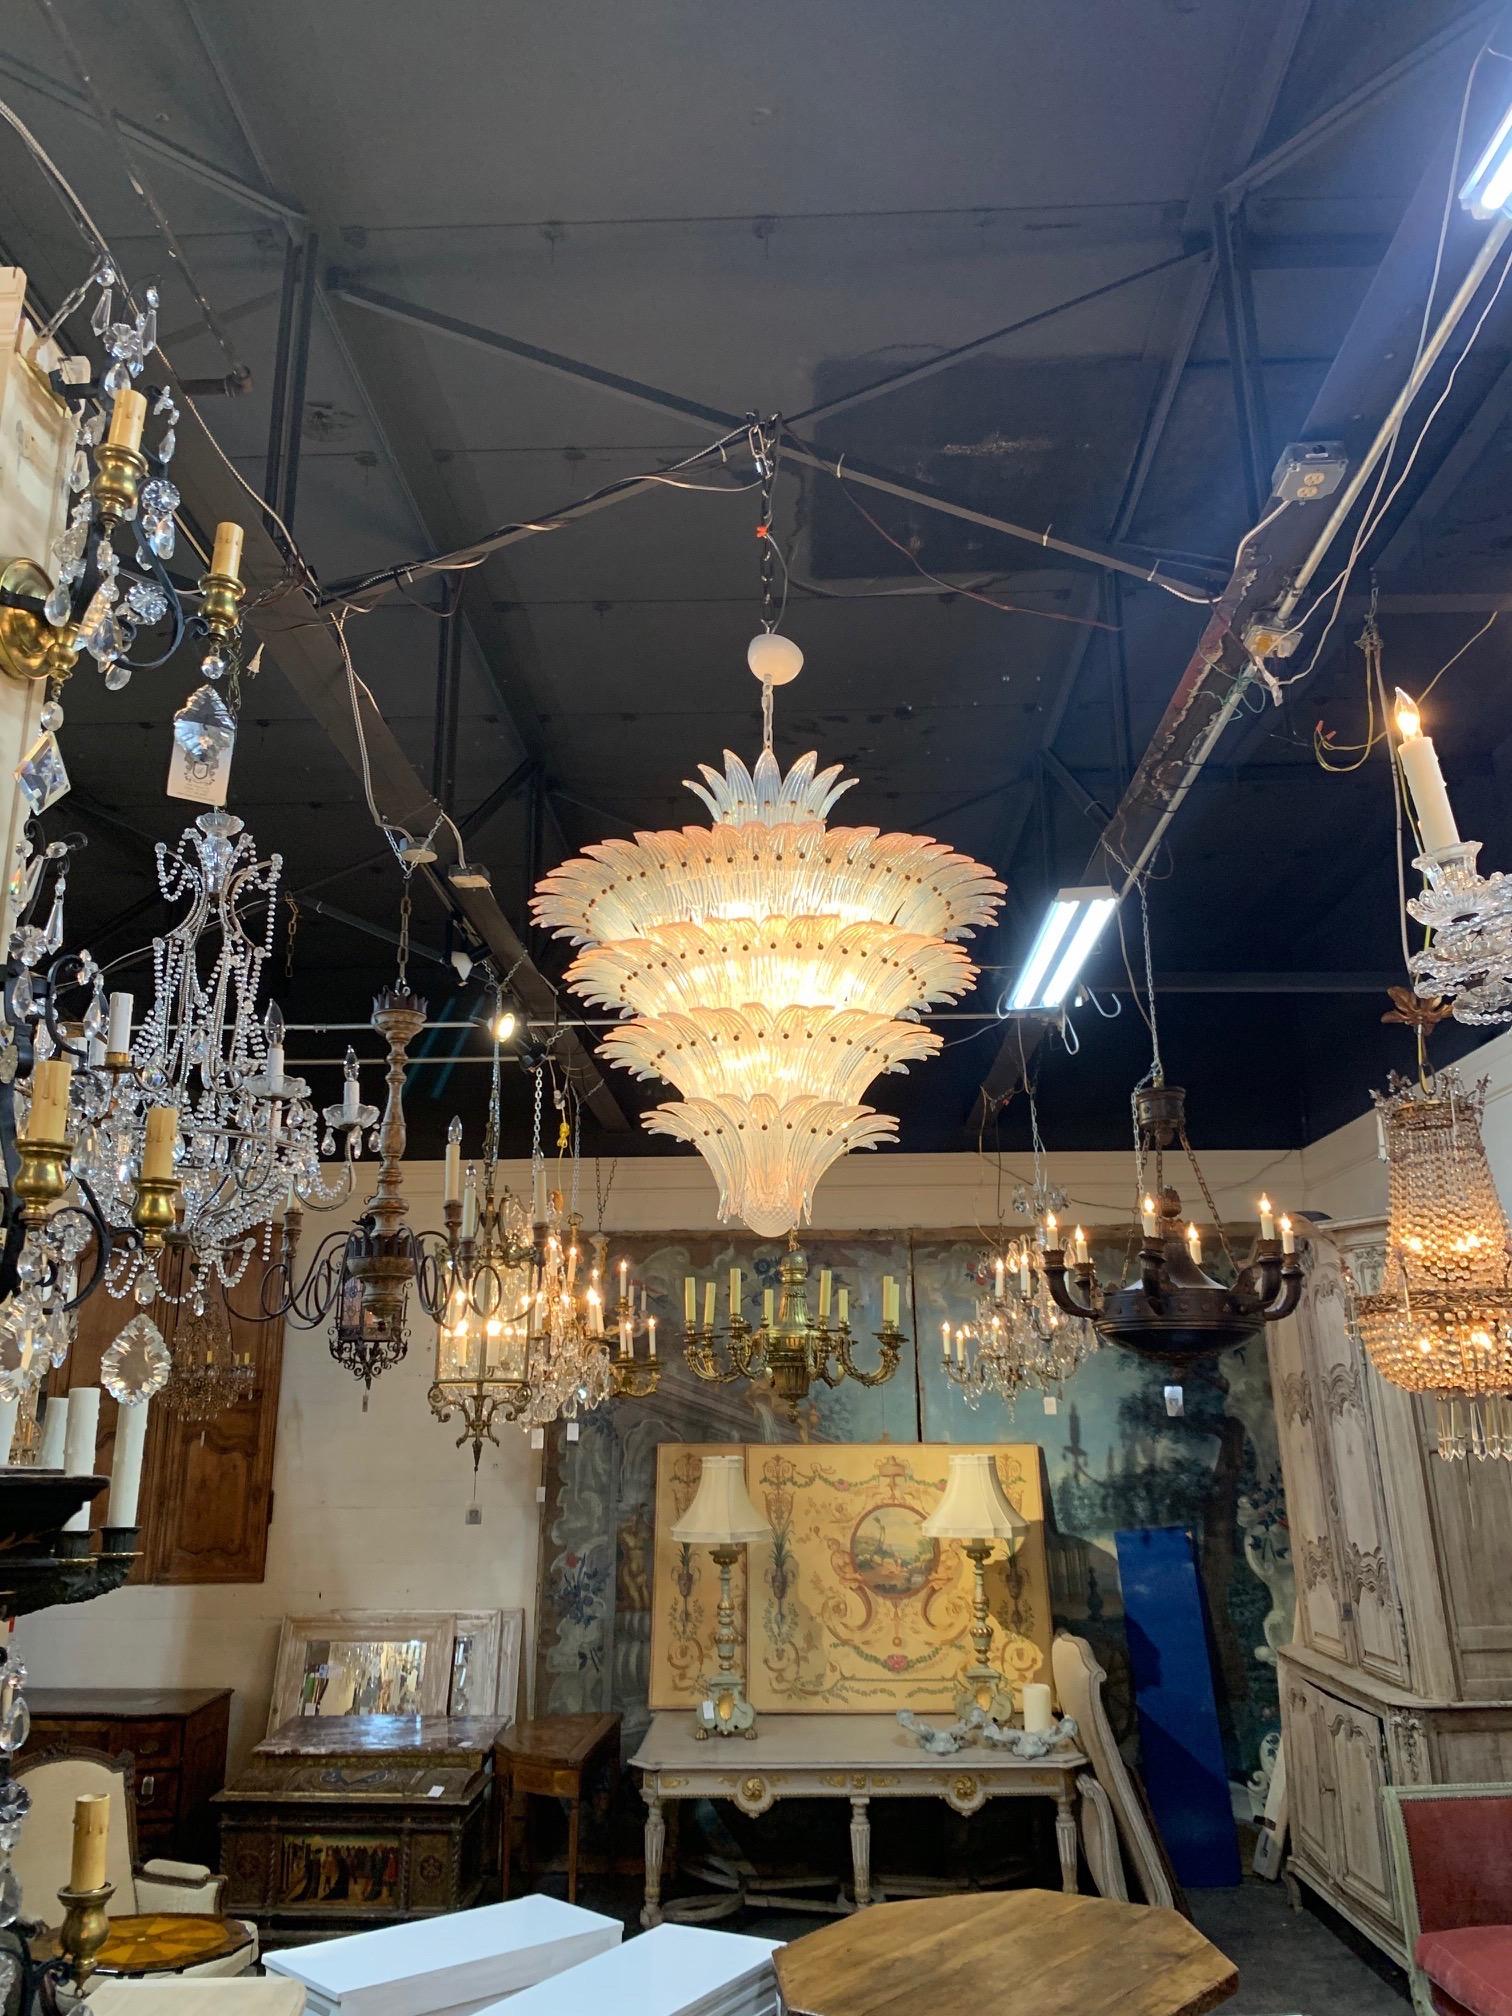 Exquisite large scale Murano glass chandelier. Layers beautiful leaf shaped glass absolutely glistens. This fixture is so impressive and is a true work of art!